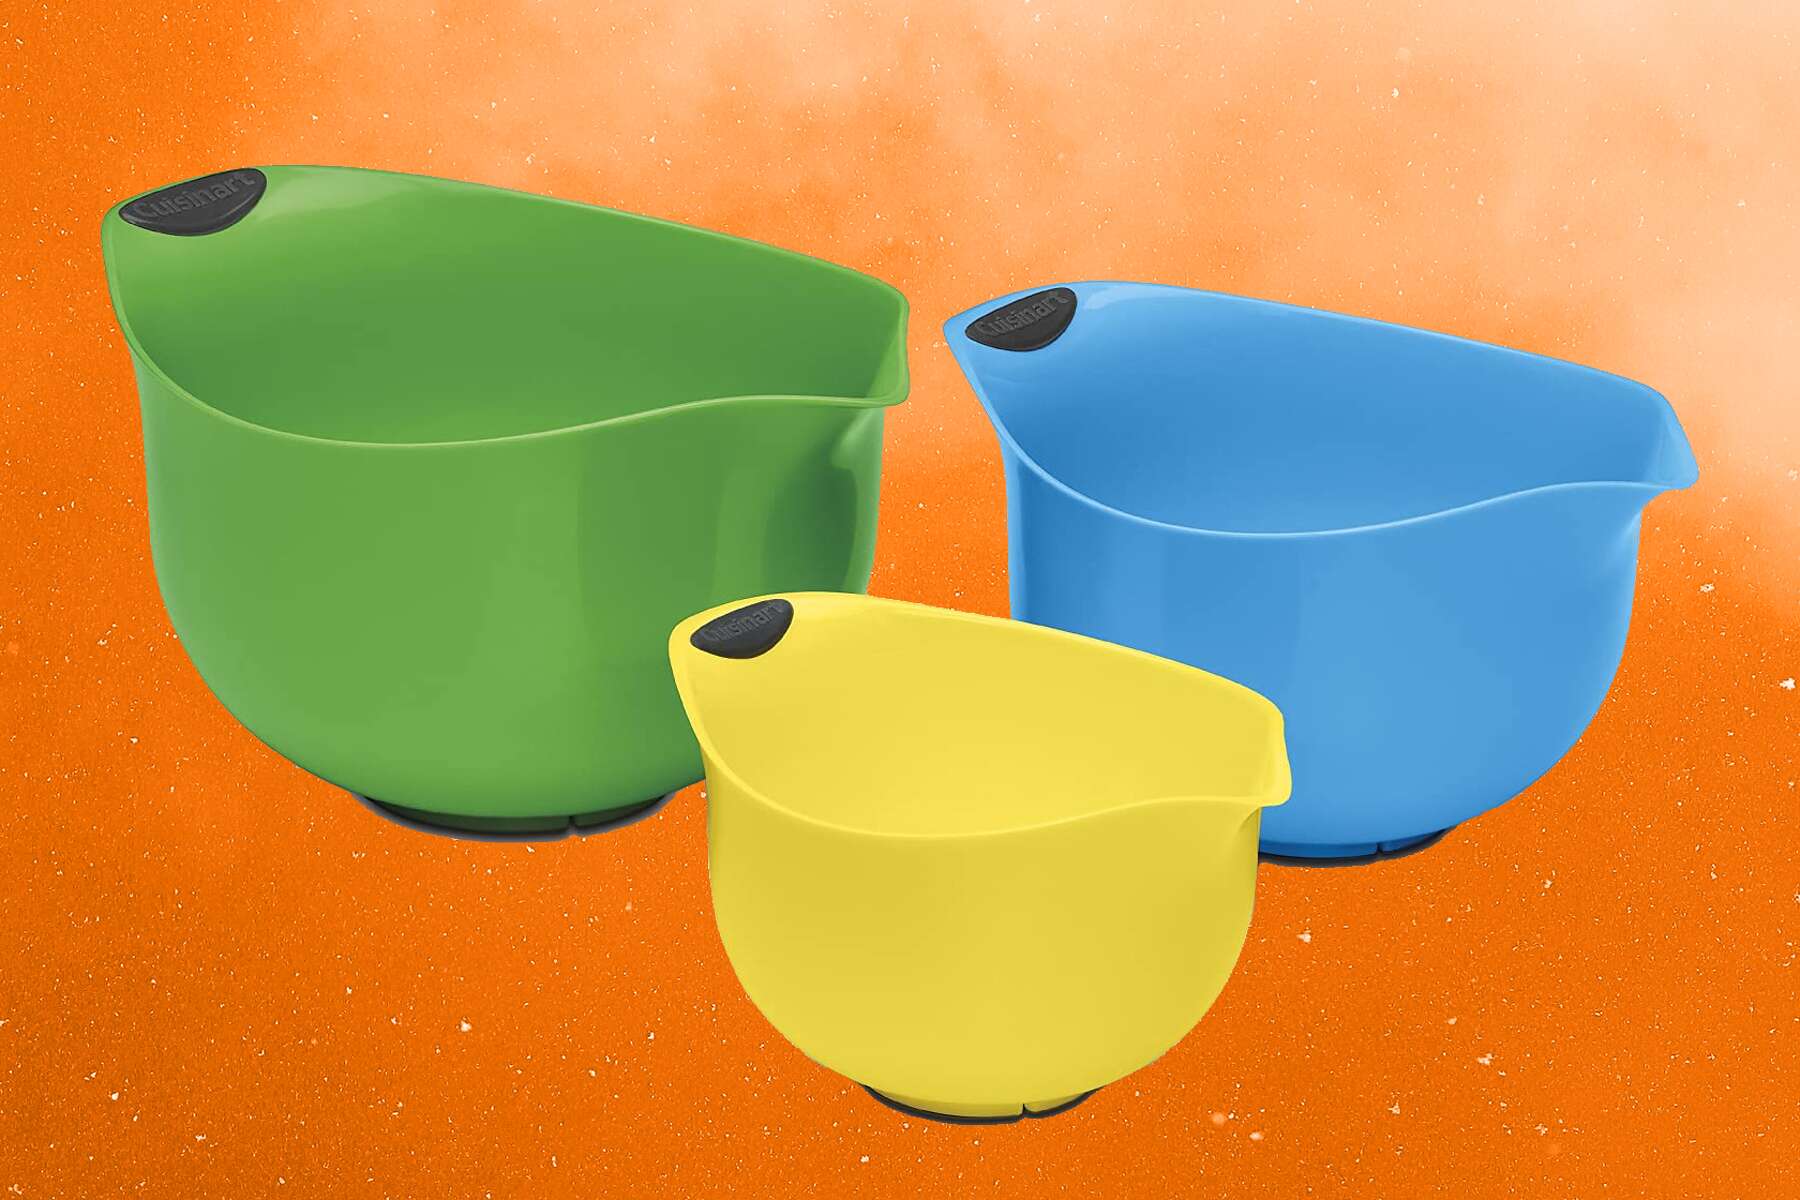 Stock your kitchen with colorful and affordable mixing bowls from Cuisinart